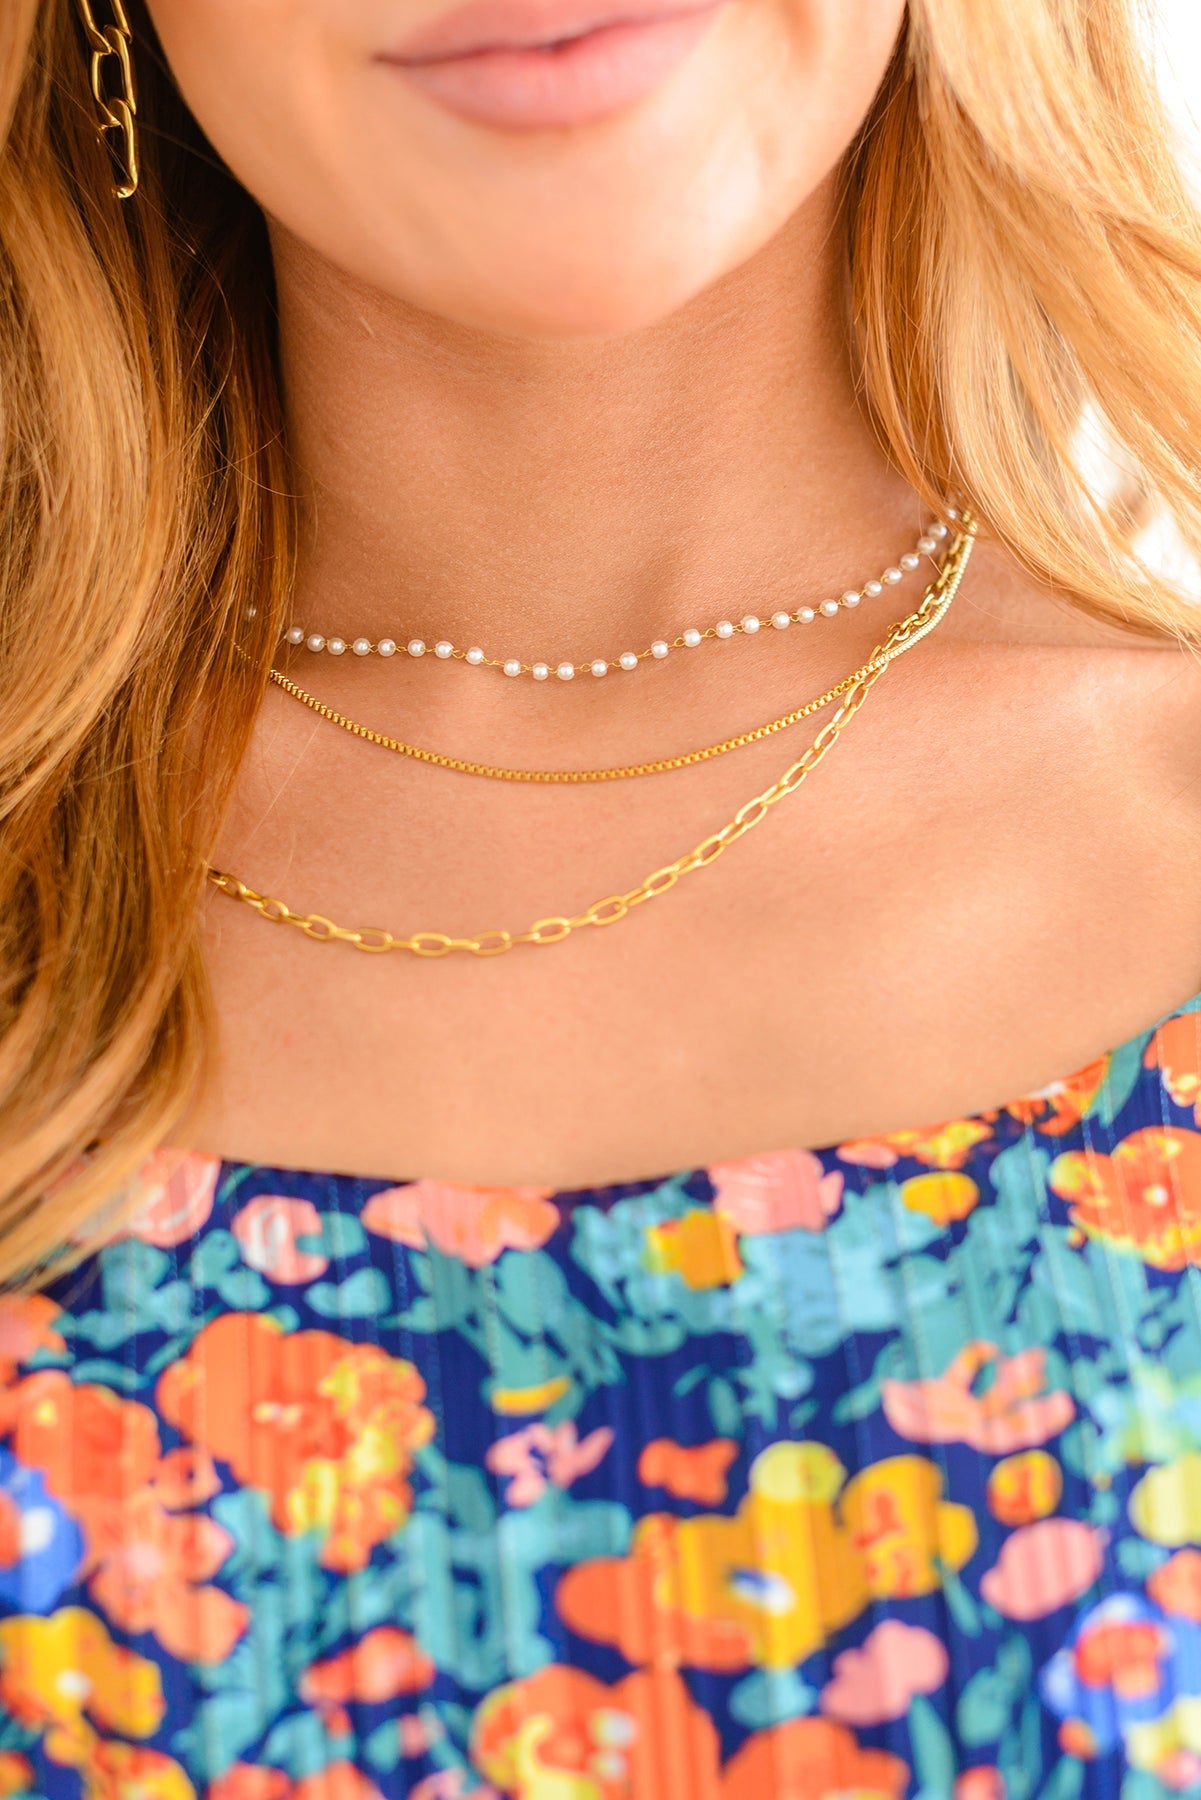 Triple Threat Layered Necklace - 4/23